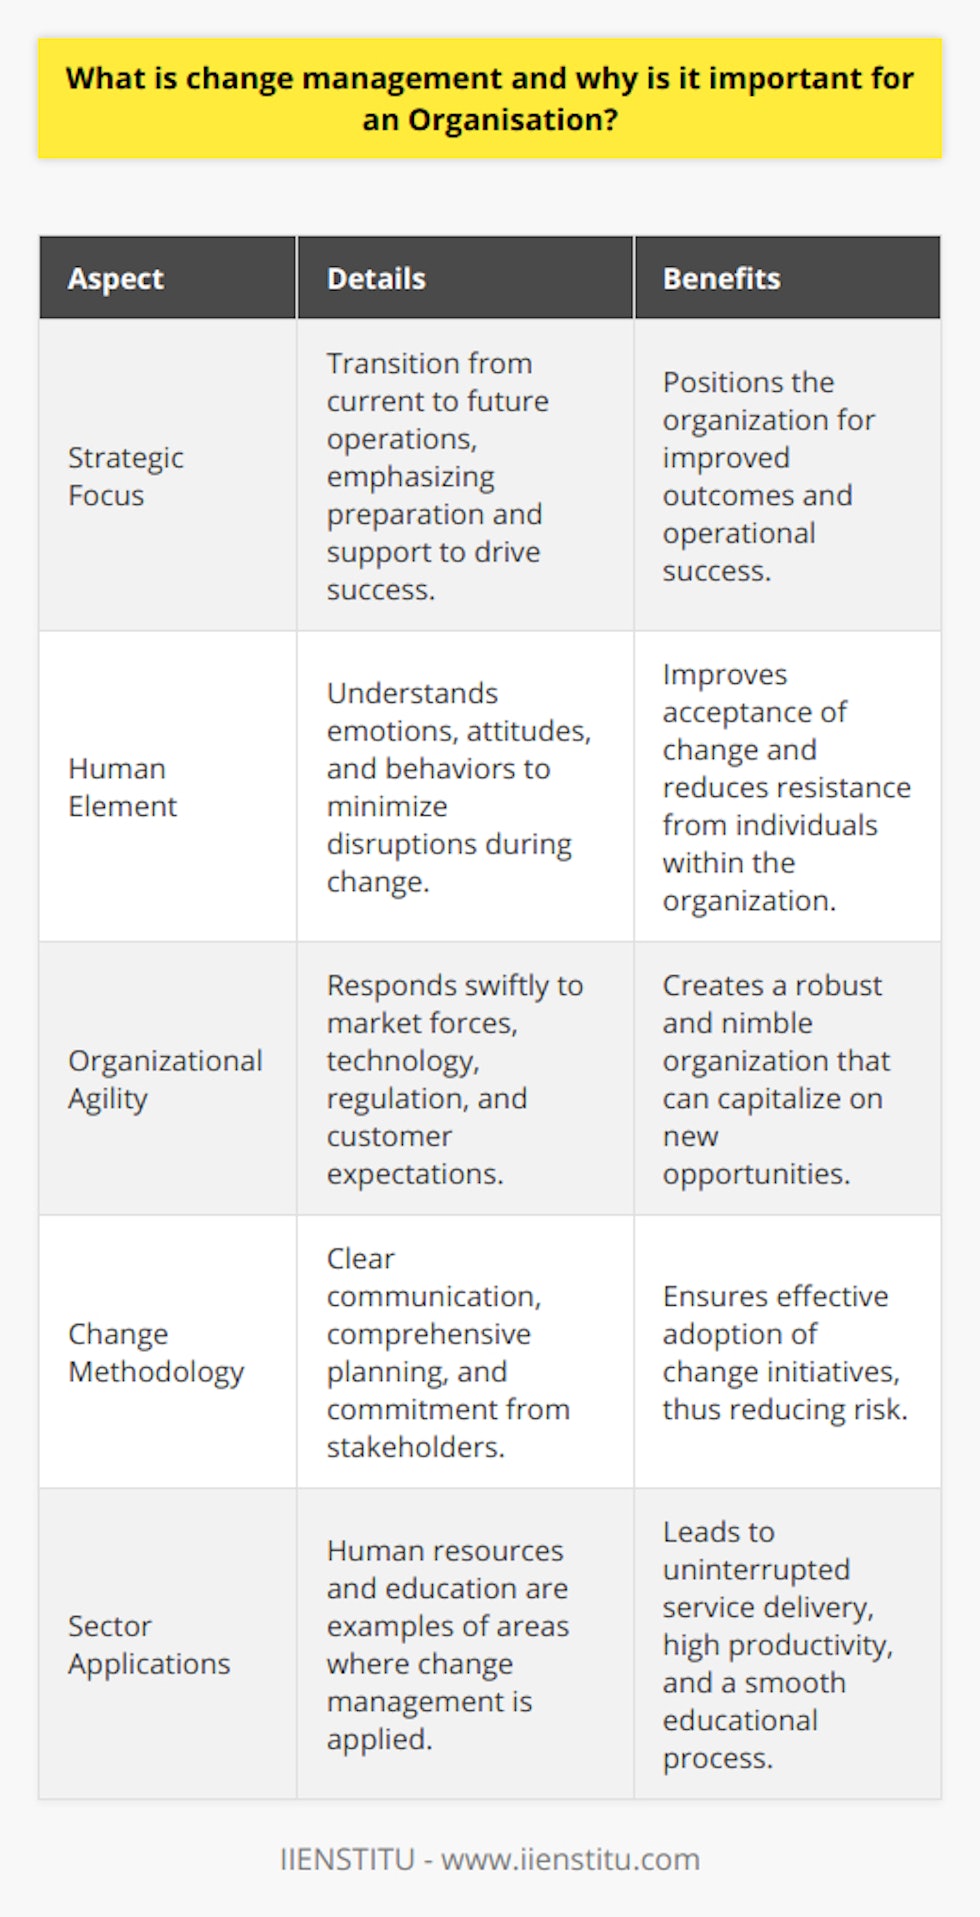 Change management is a strategic approach employed by organizations to transition from their current operations to a future, often improved, stage. This practised discipline is about preparing and supporting individuals, teams, and the whole organization to adopt change in order to drive organizational success and outcomes.One unique aspect of change management is its focus on the human element. Unlike project management, which emphasizes timelines, tasks, and targets, change management prioritizes people and their responses to change. It is about understanding the emotions, attitudes, and behaviors of individuals affected by change and working with them to minimize disruptions.Effective change management is crucial to an organization's survival and growth. It enables a company to respond quickly to market forces, including competitive pressures, advances in technology, shifting regulatory landscapes, and evolving customer expectations. Organizations that can do this effectively are often more robust and agile, positioning themselves to capitalize on new opportunities as they arise.For a change management initiative to be successful, there must be clear communication, comprehensive planning, and a thorough understanding of the implications of change. By creating a strategic vision, developing supportive leadership, and securing the commitment of those involved, organizations can ensure change is not only accepted but embraced.In the context of human resources, change management involves transitioning services, employees, or other operational elements without sacrificing service delivery, employee productivity, or morale. This encompasses methods like providing training and support to help staff adapt to new systems or processes, restructuring operations to streamline efficiency, or integrating new corporate values into the organizational culture.In an educational environment, such as IIENSTITU, change management might involve updating curriculum, adopting new teaching technologies, or restructuring programs to better meet the needs of students. These changes must be managed sensitively to ensure that staff and learners can transition smoothly, without disrupting the educational process.The importance of change management cannot be overstated. It underpins the flexibility and adaptability of an organization. A well-managed change initiative can improve operational efficiency, increase employee engagement, reduce risk, and ultimately lead to enhanced organizational performance. By recognizing the importance of change management, organizations can equip themselves to face the future with confidence, making transformative choices that allow them to thrive in an ever-changing business landscape.